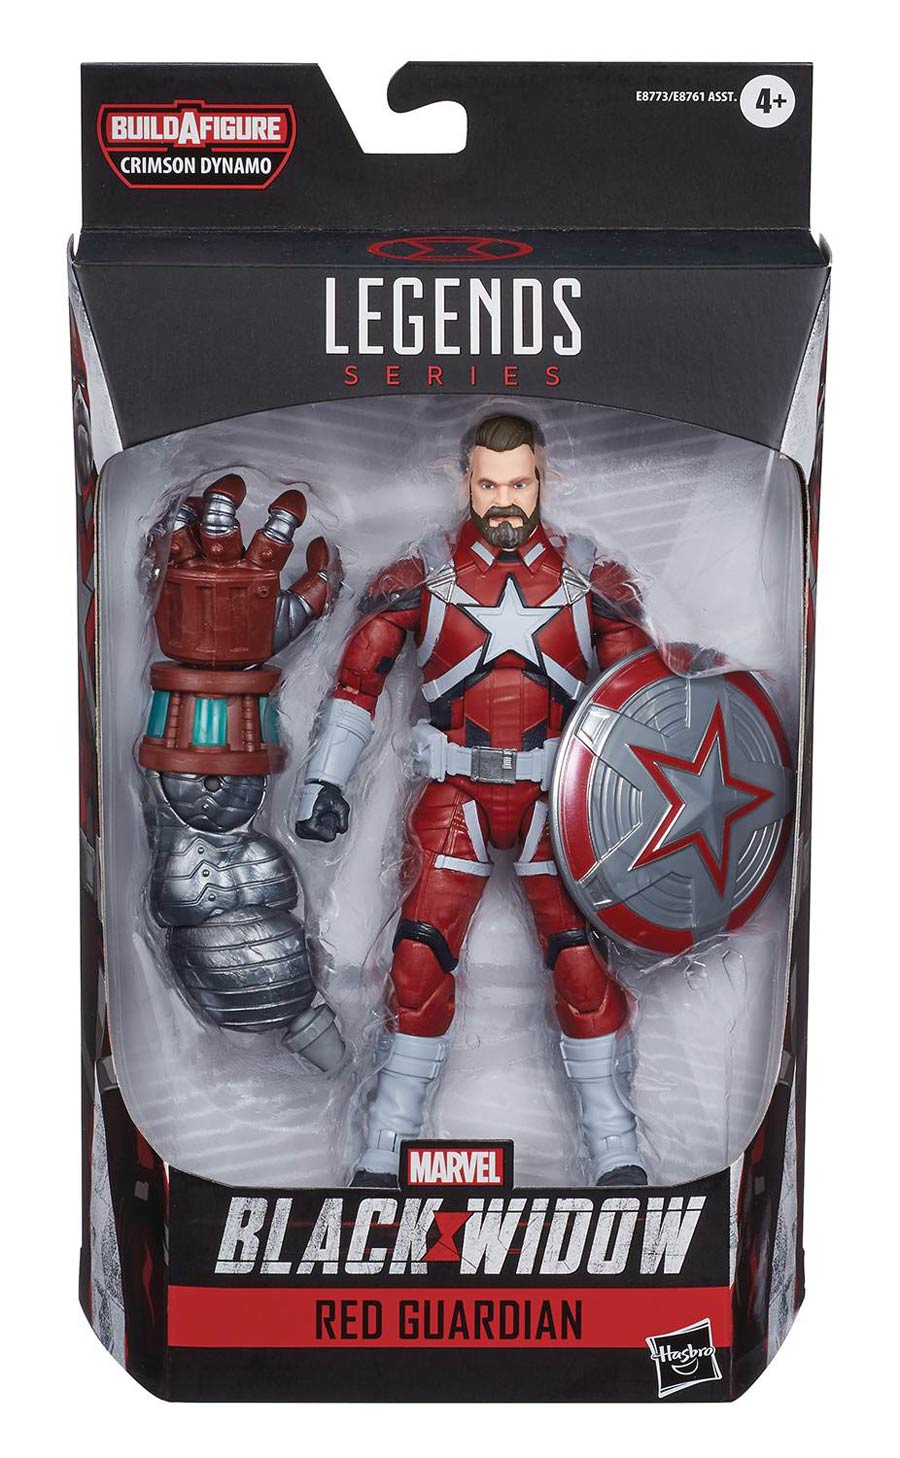 Marvel Black Widow Movie Legends 2019 6-Inch Action Figure - Red Guardian